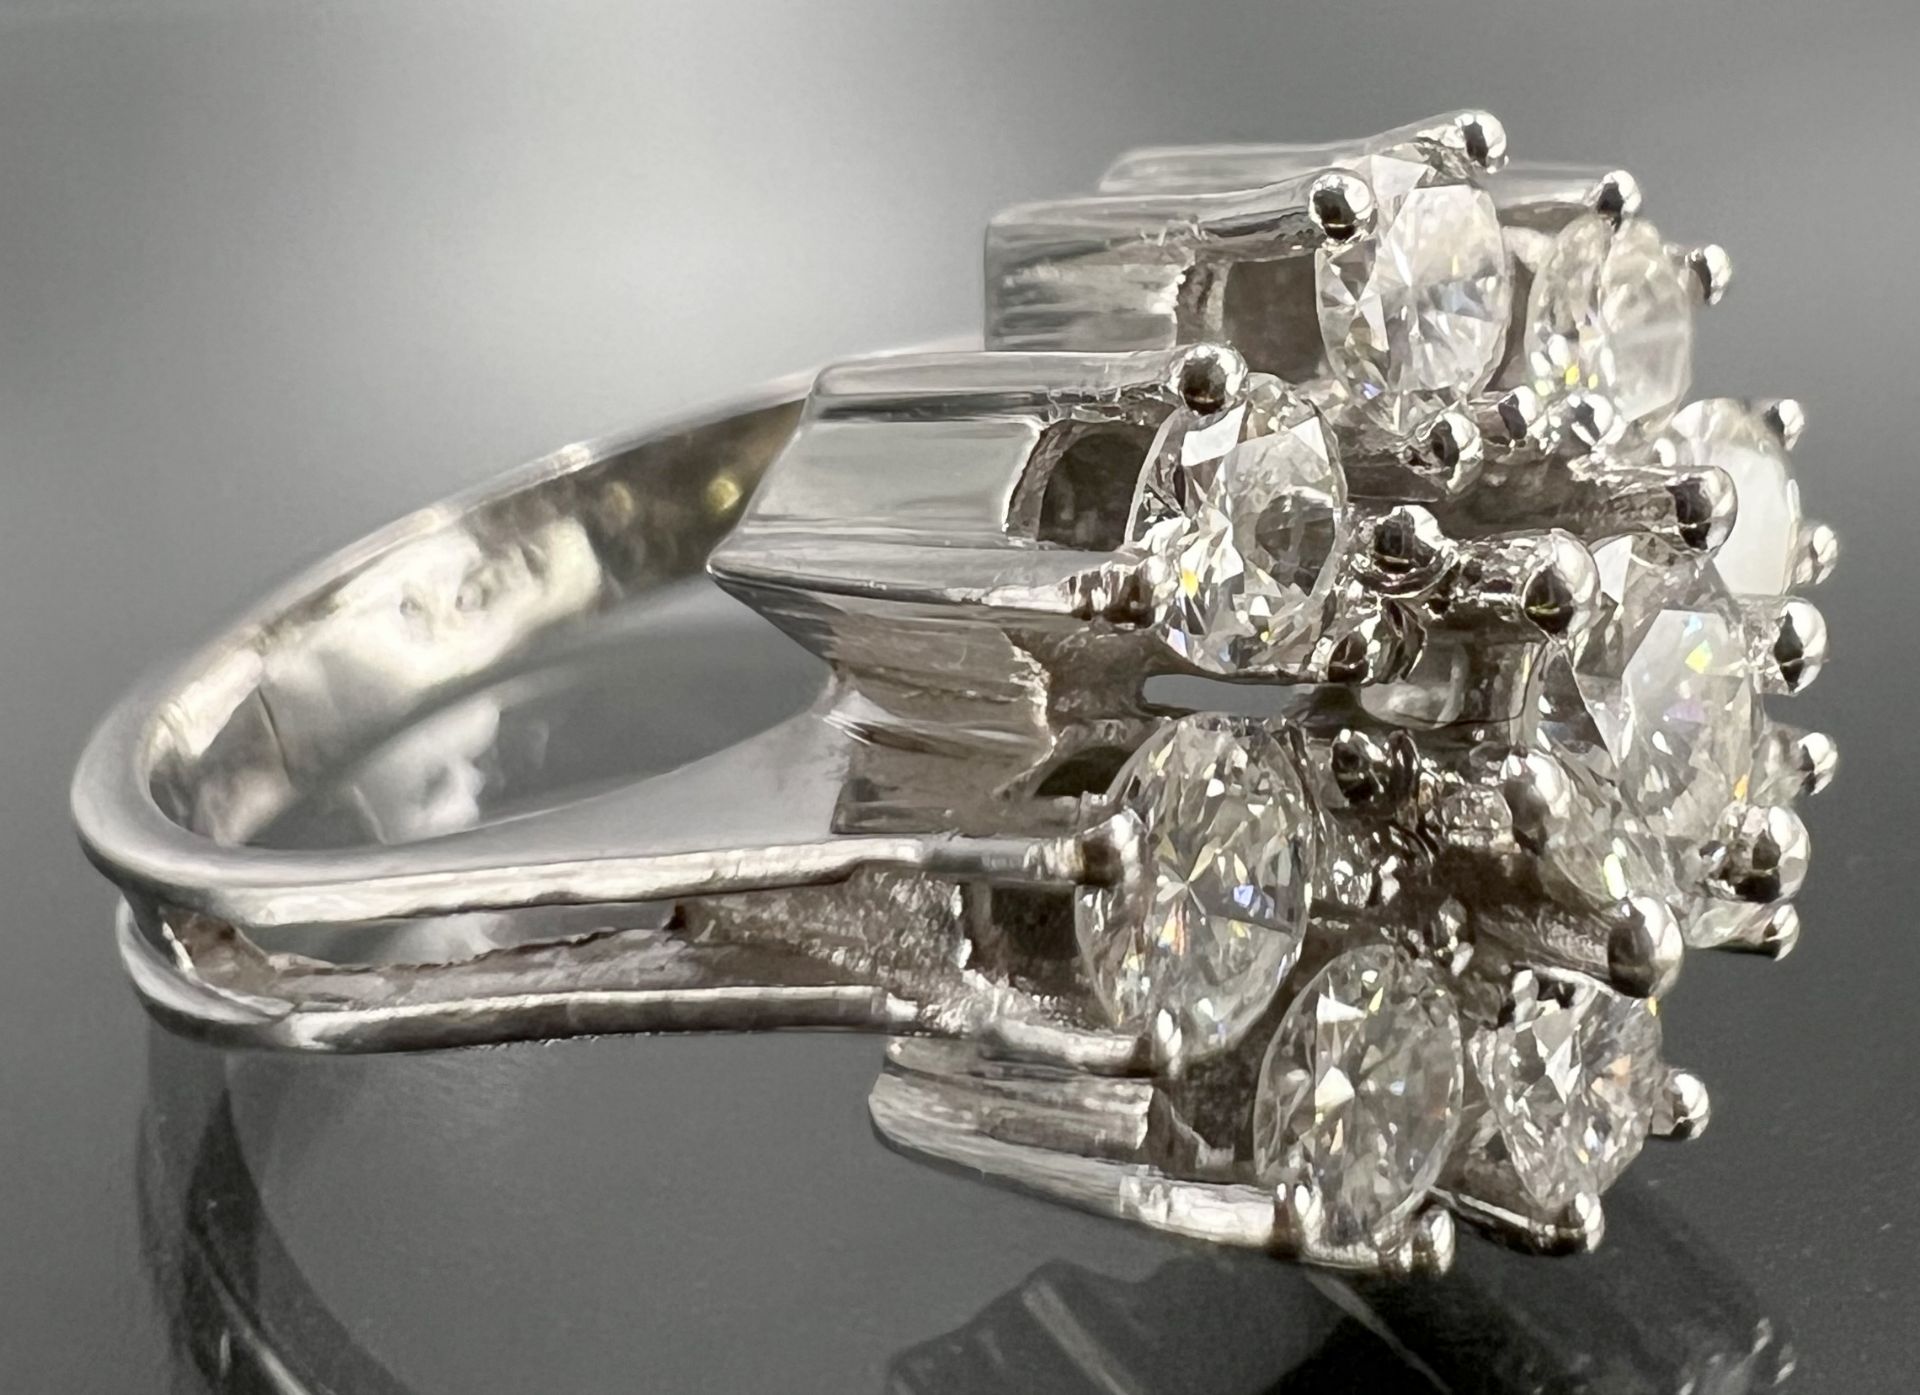 Ladies' ring 585 white gold with 9 diamonds. - Image 3 of 12